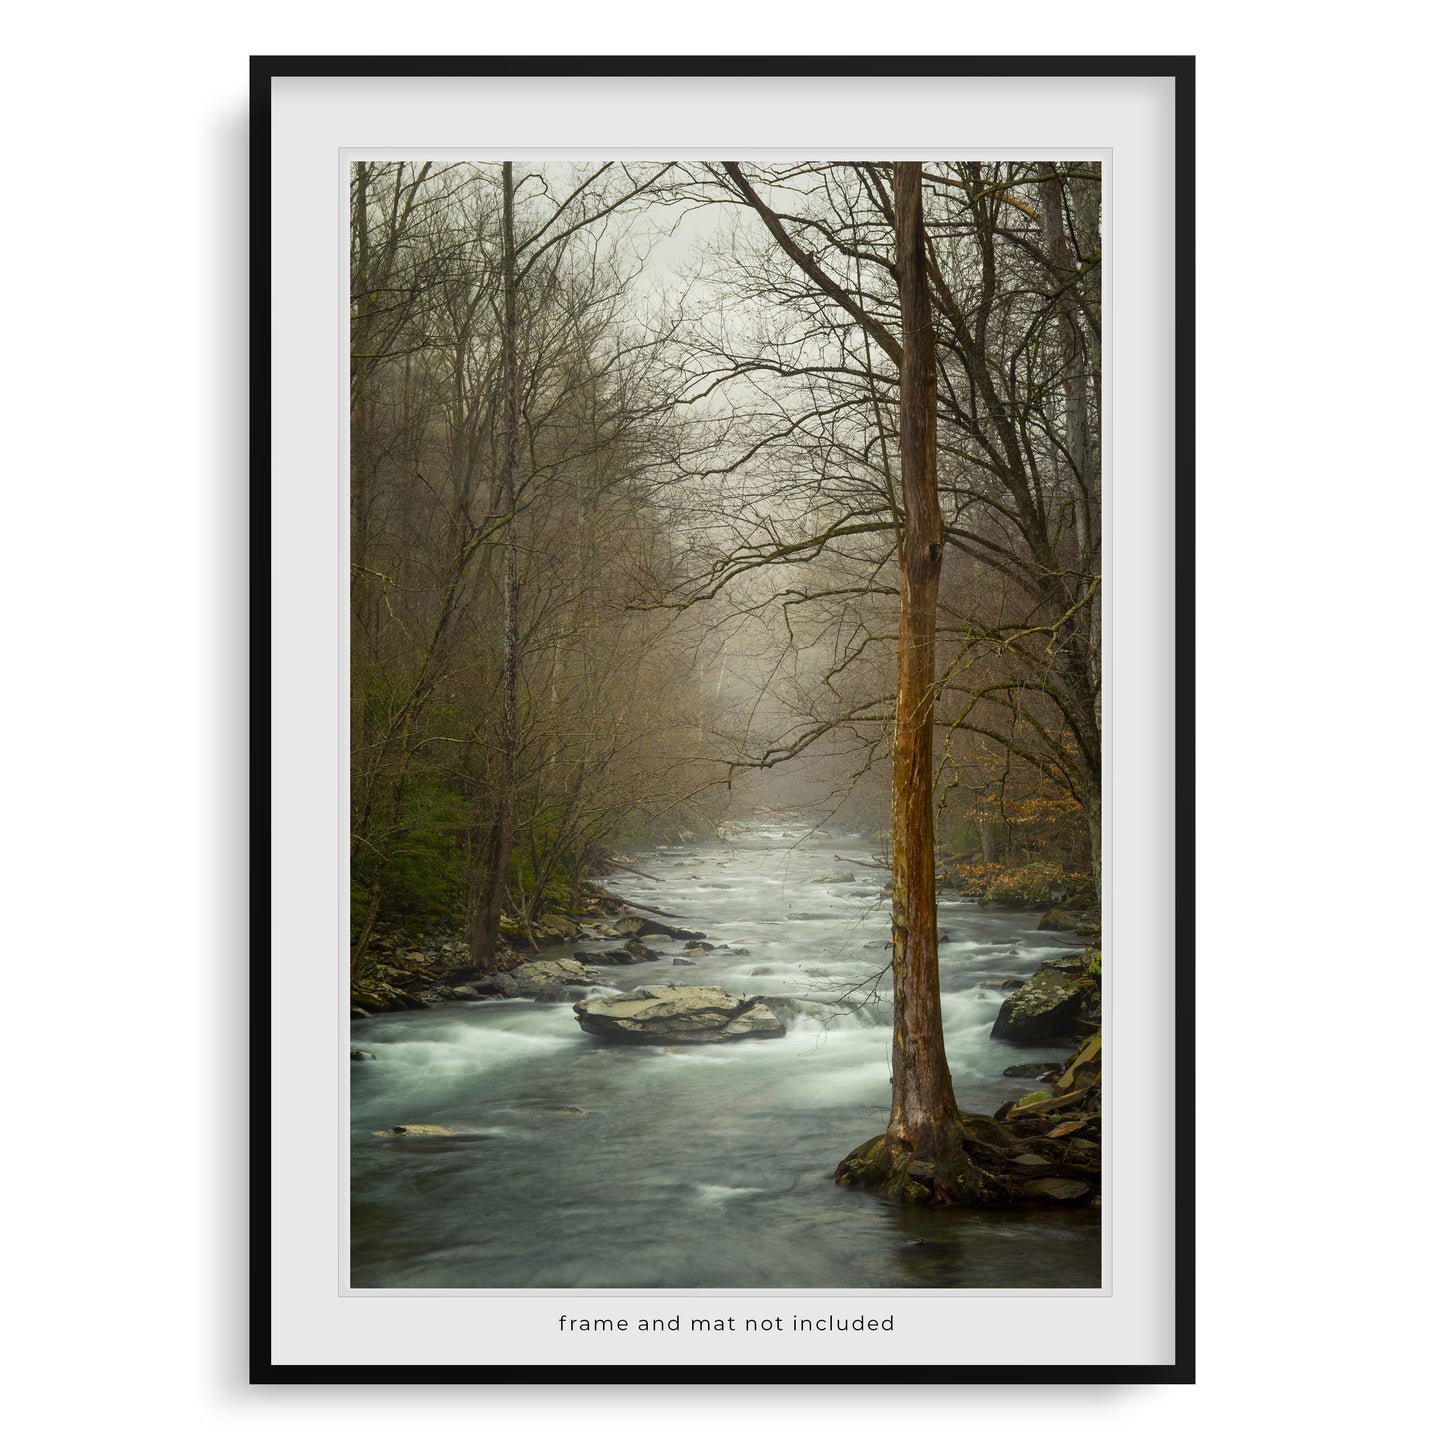 Image displaying a wall art print within a thin black frame and white mat, meant to inspire potential display options. The actual product is the print only; the frame and mat are not included with purchase.